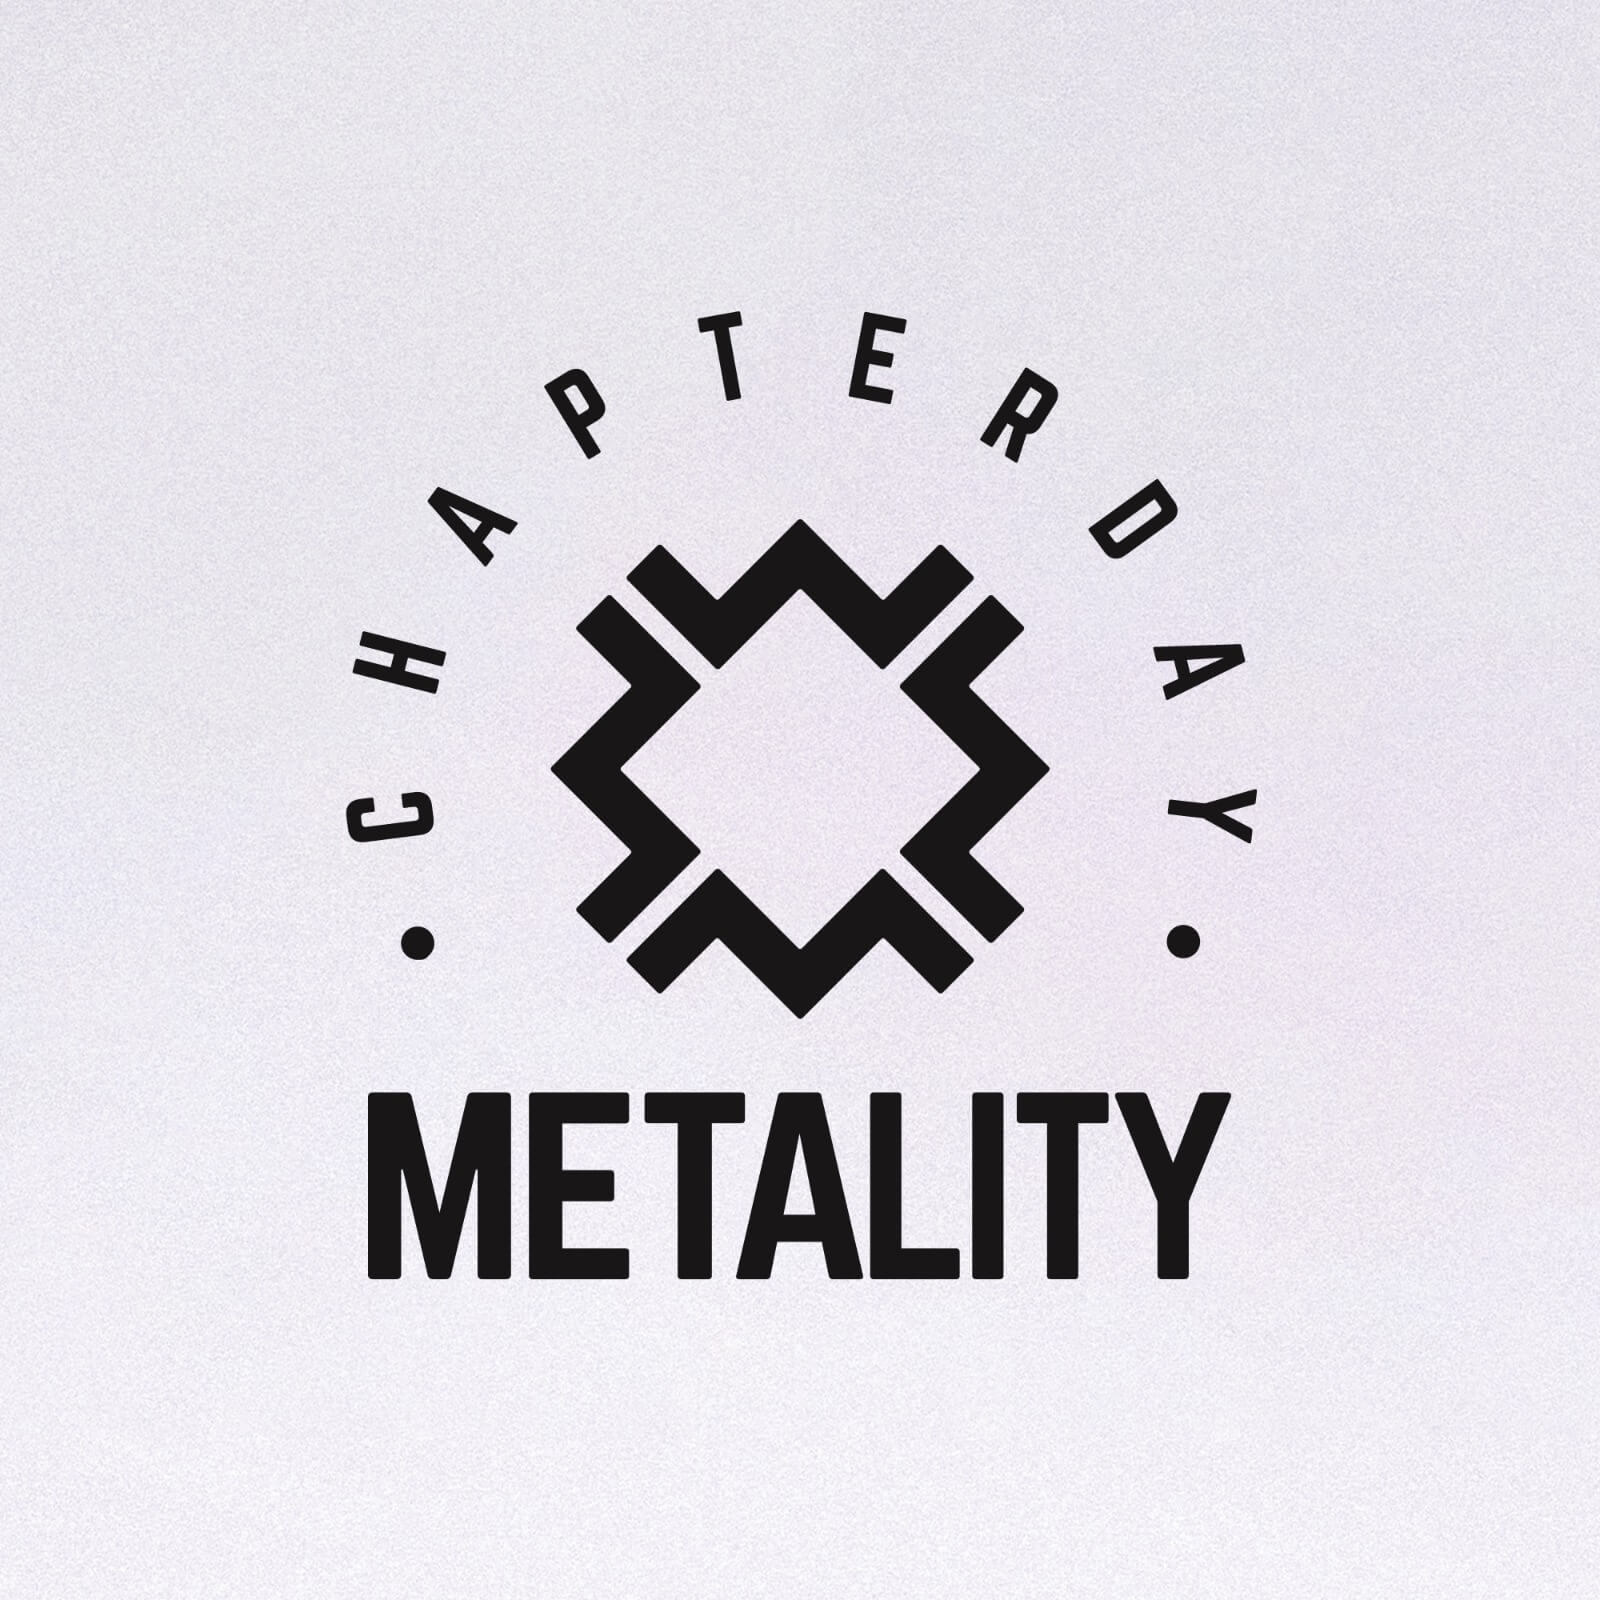 Der Metality Chapterday (21. August 2021)